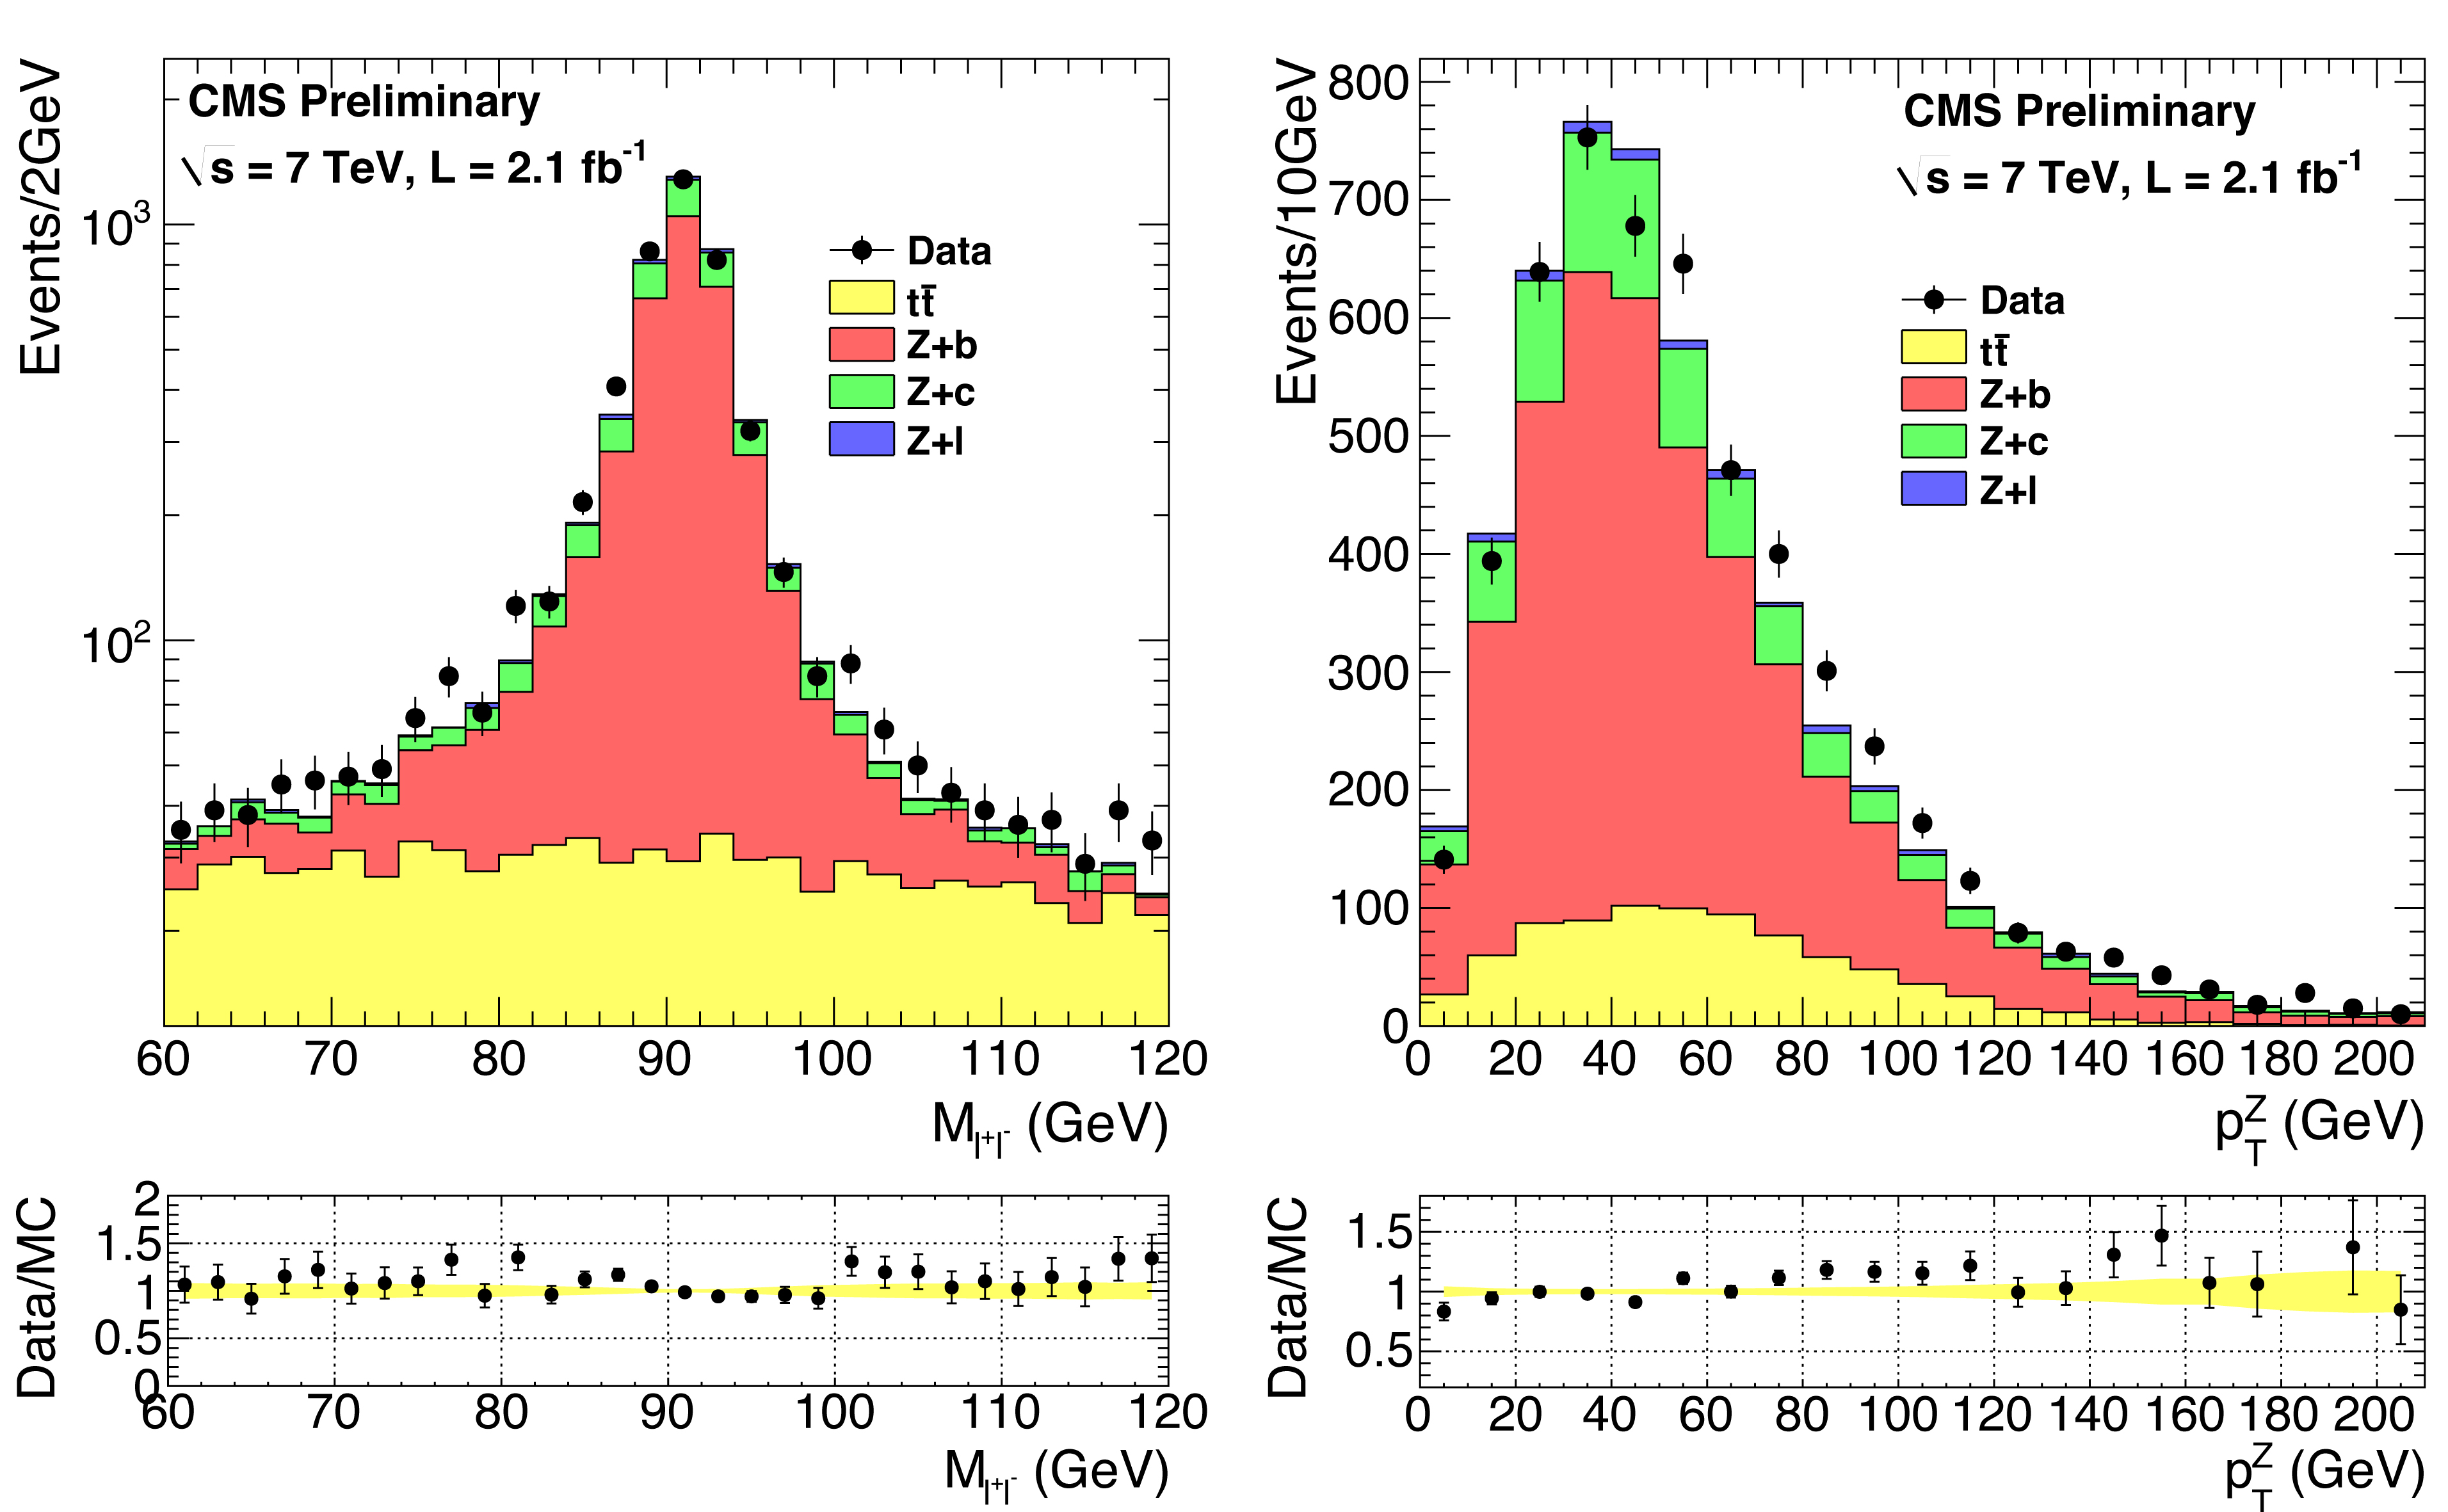 Invariant mass (left) and p<sub>T</sub> (right) of the lepton pairs after the dilepton+b-jet selection. The yellow bands in the lower plots represent the statistical uncertainty on the Monte Carlo yield.